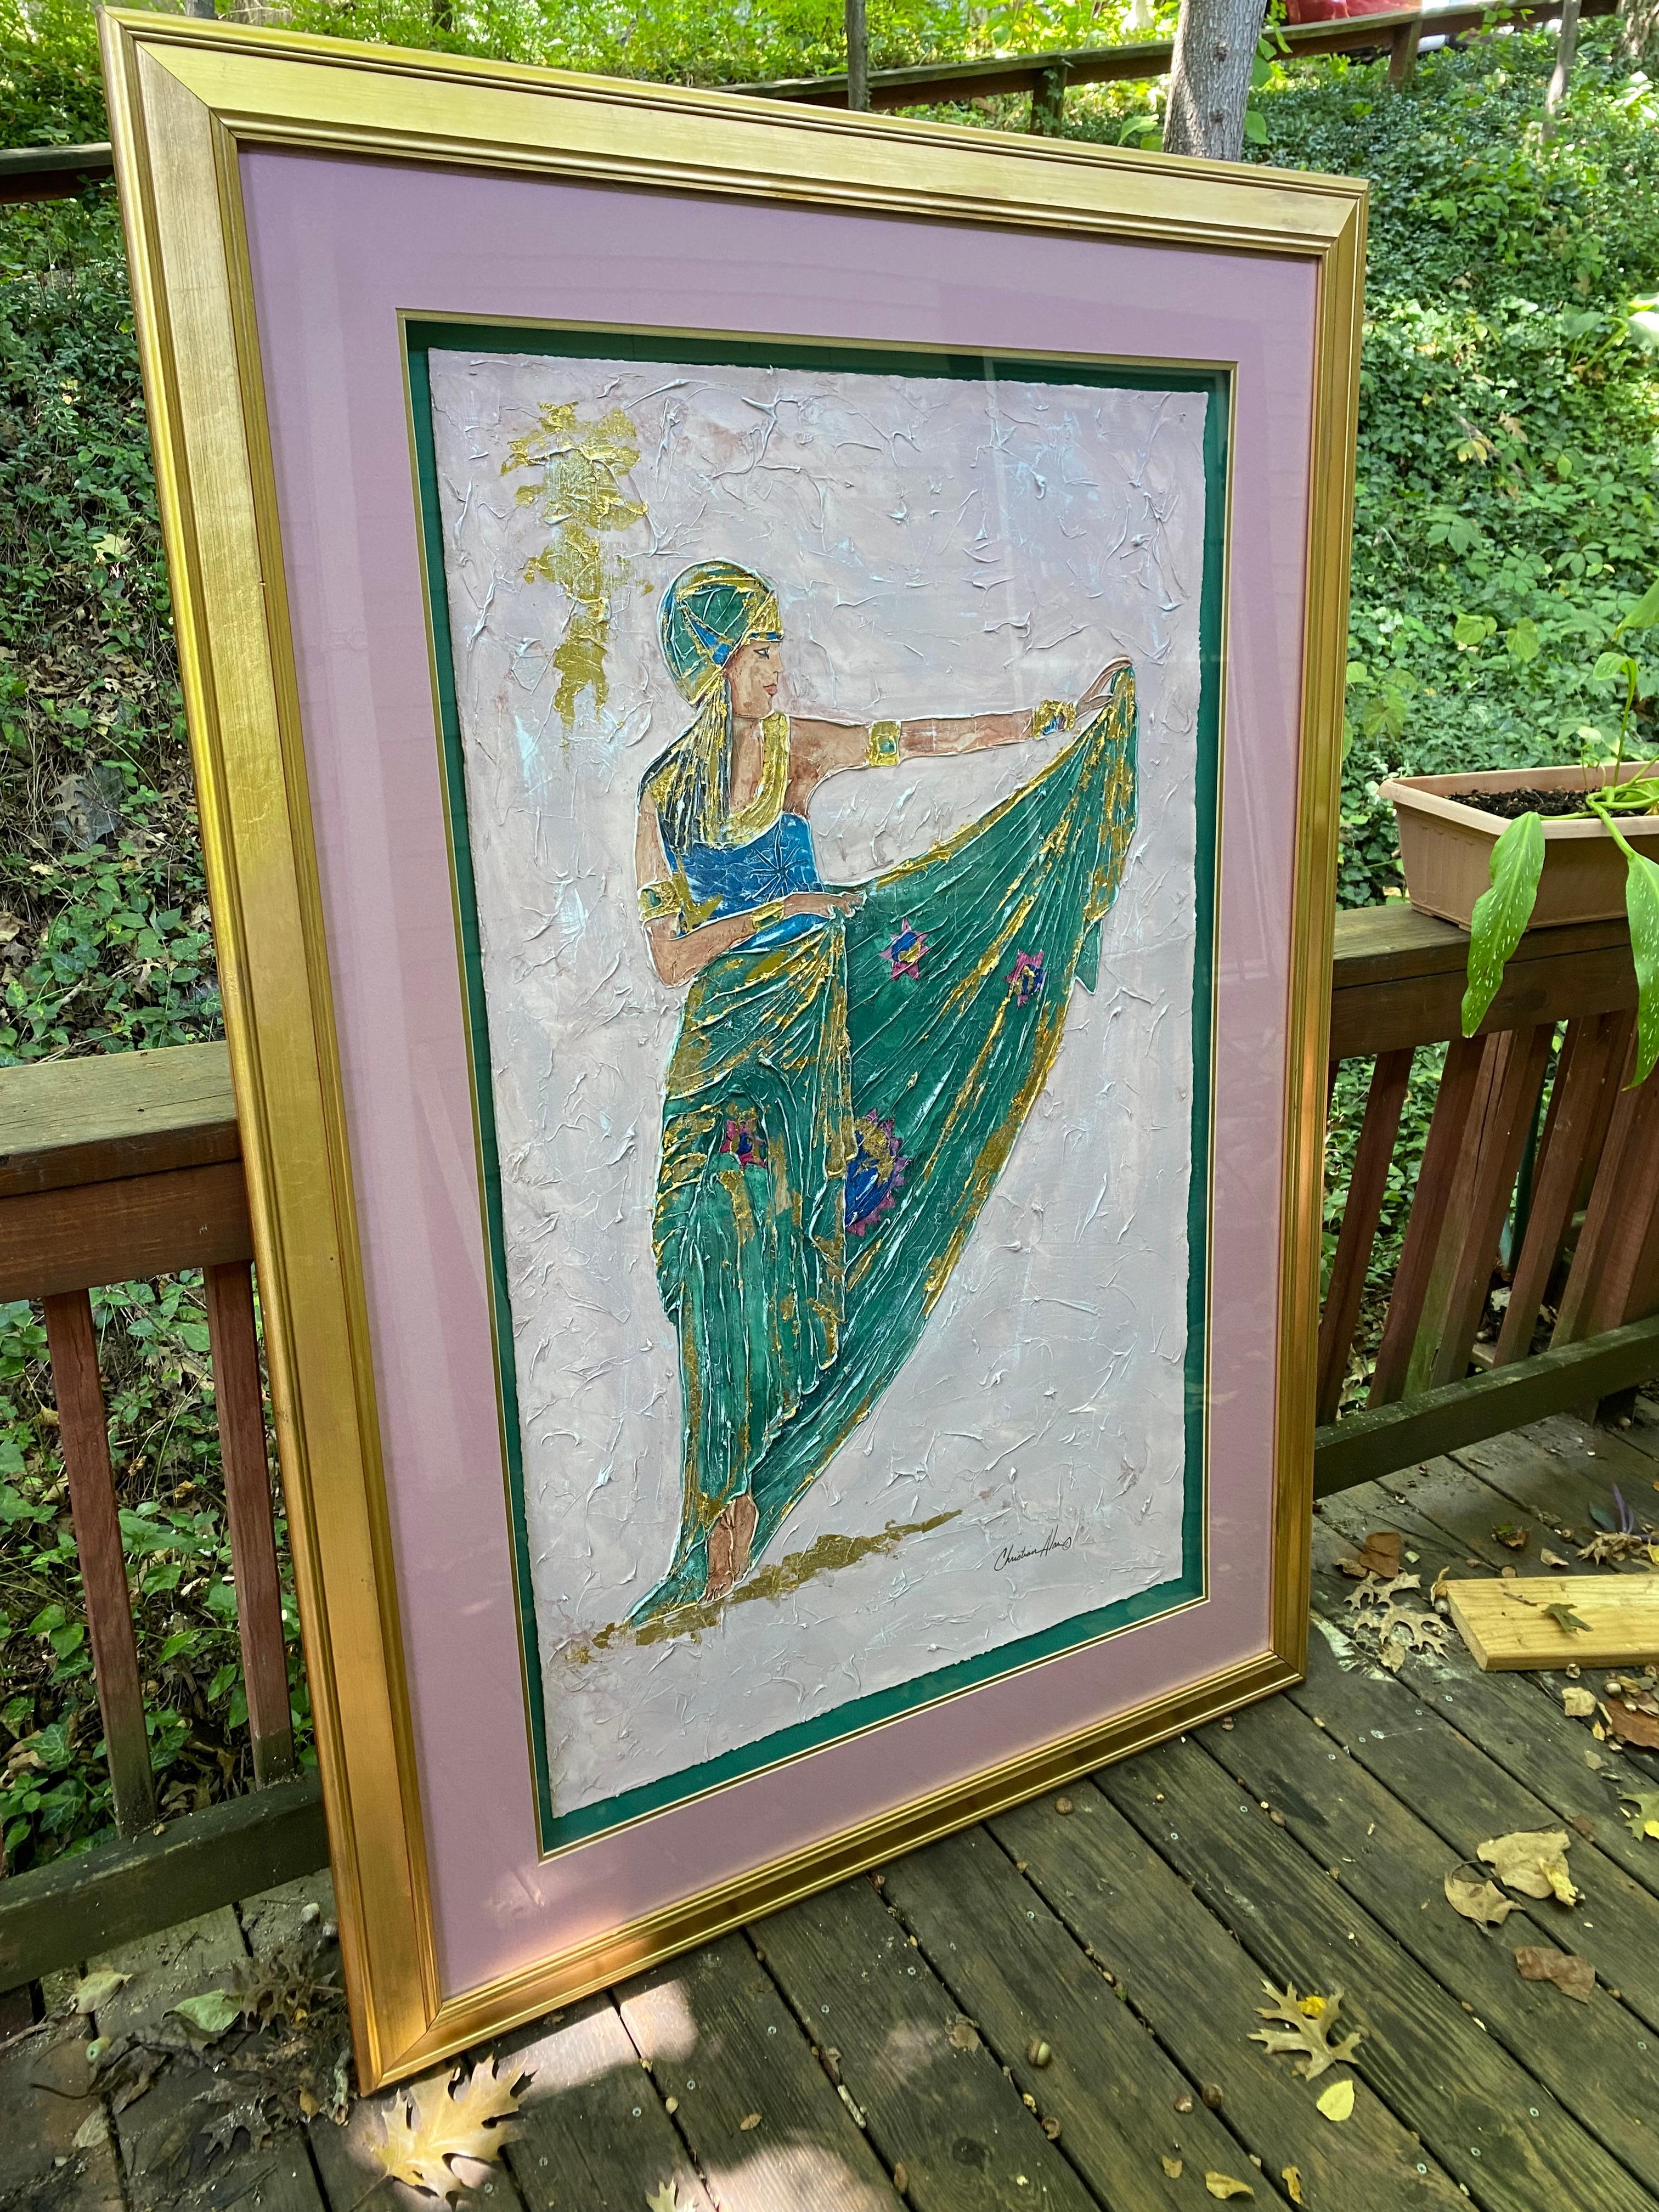 Original painting of woman in green dress with gold, purple and pink accents.  
Signed by Christian Alan.
20th century mixed media.
Painting on paper.
Large image.   Image is 49